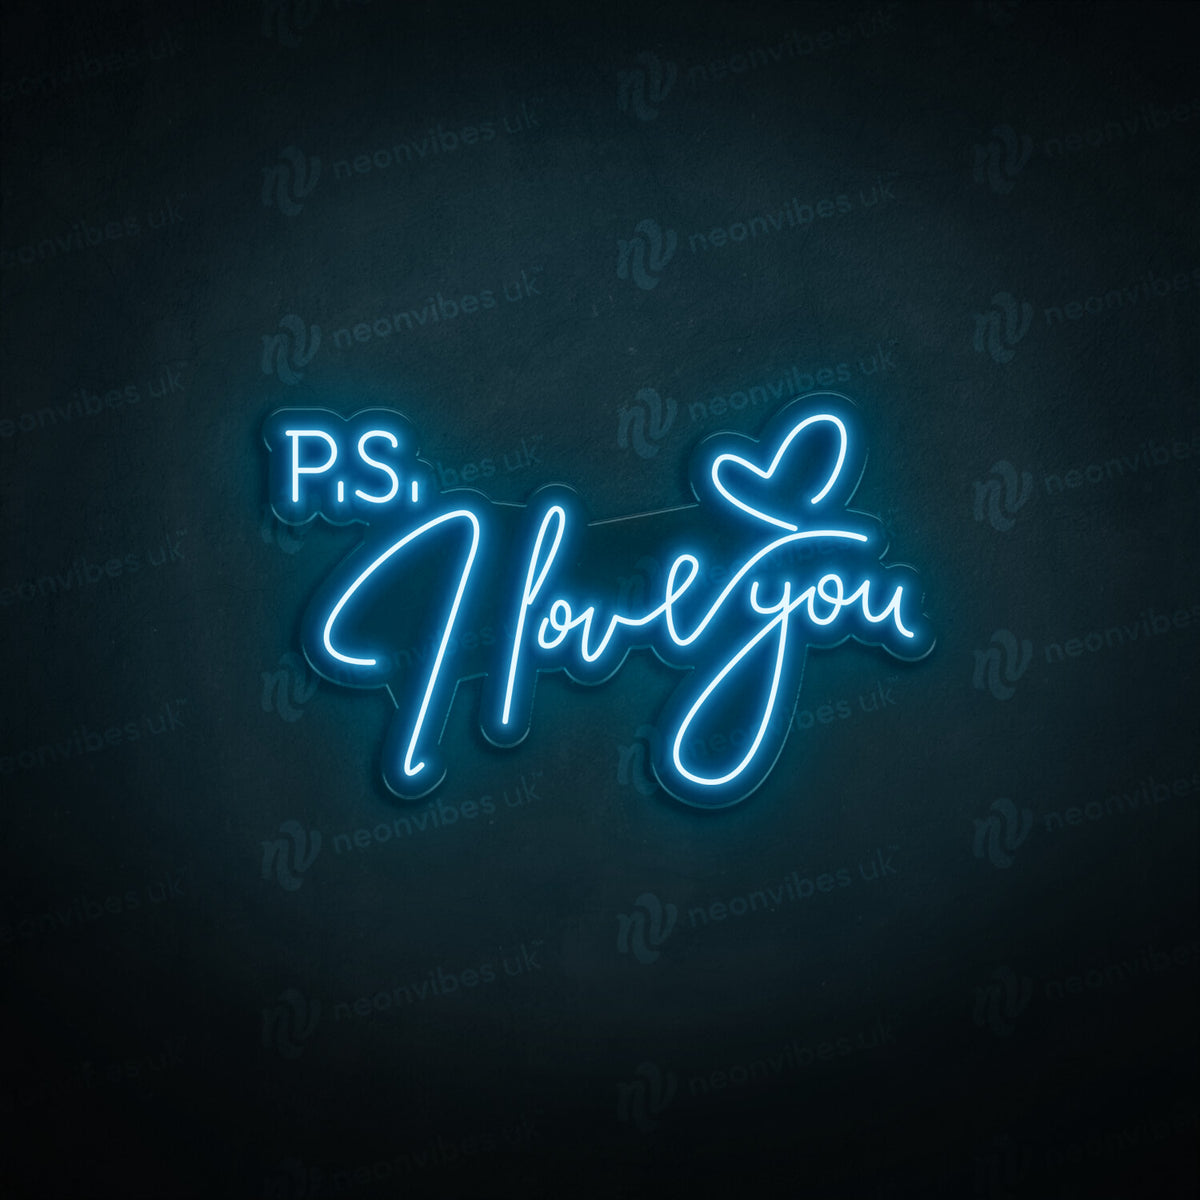 PS I Love you neon sign